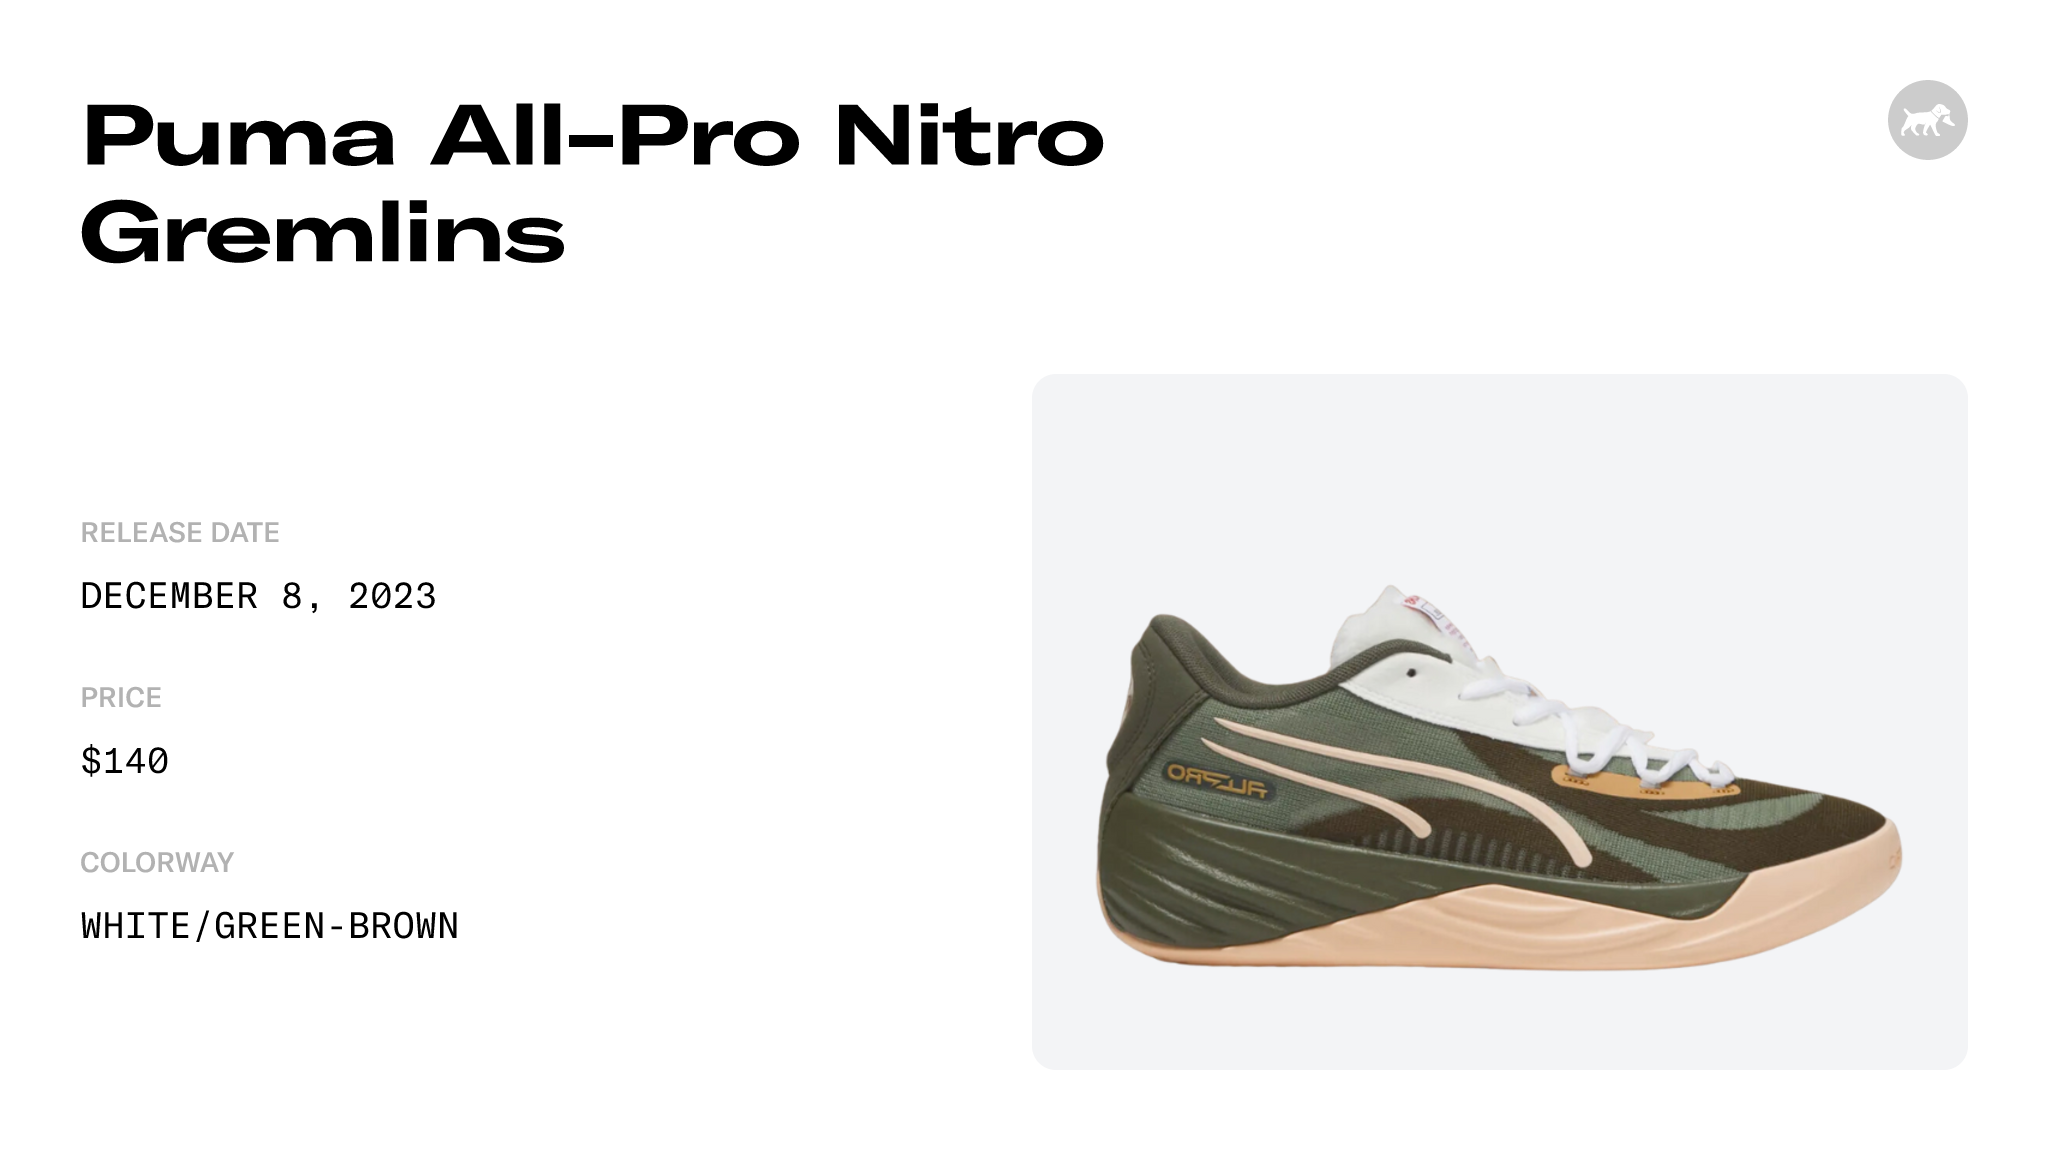 Puma All-Pro Nitro Gremlins - 379303-01 Raffles and Release Date